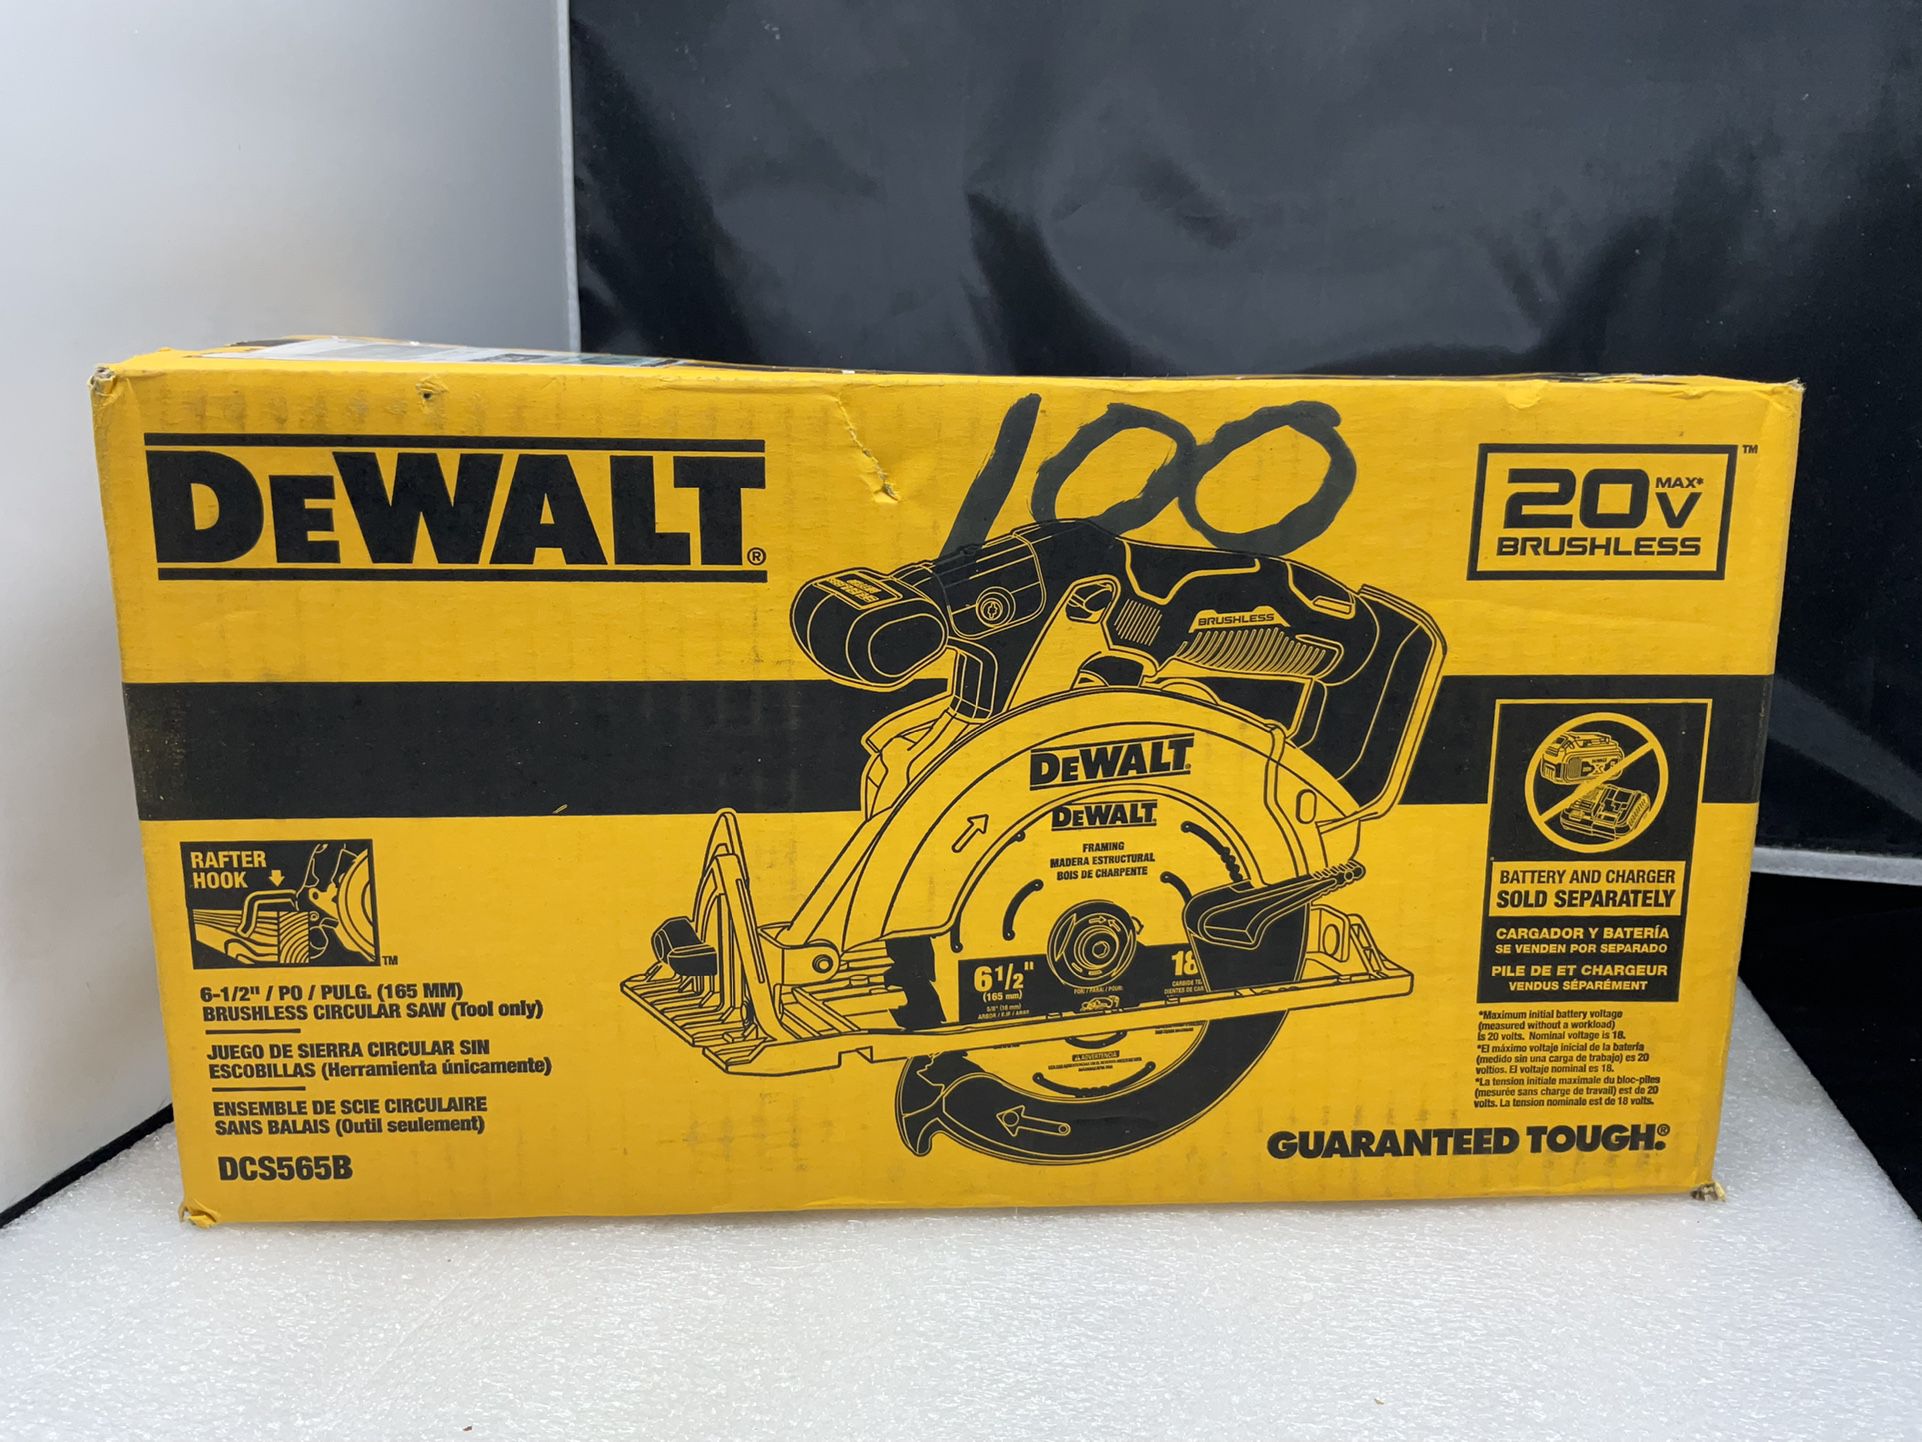 NEW Genuine DeWalt DCS565B 20V MAX Circular Saw, 6-1/2-Inch, Cordless, Tool  Only for Sale in Bloomfield, NJ OfferUp